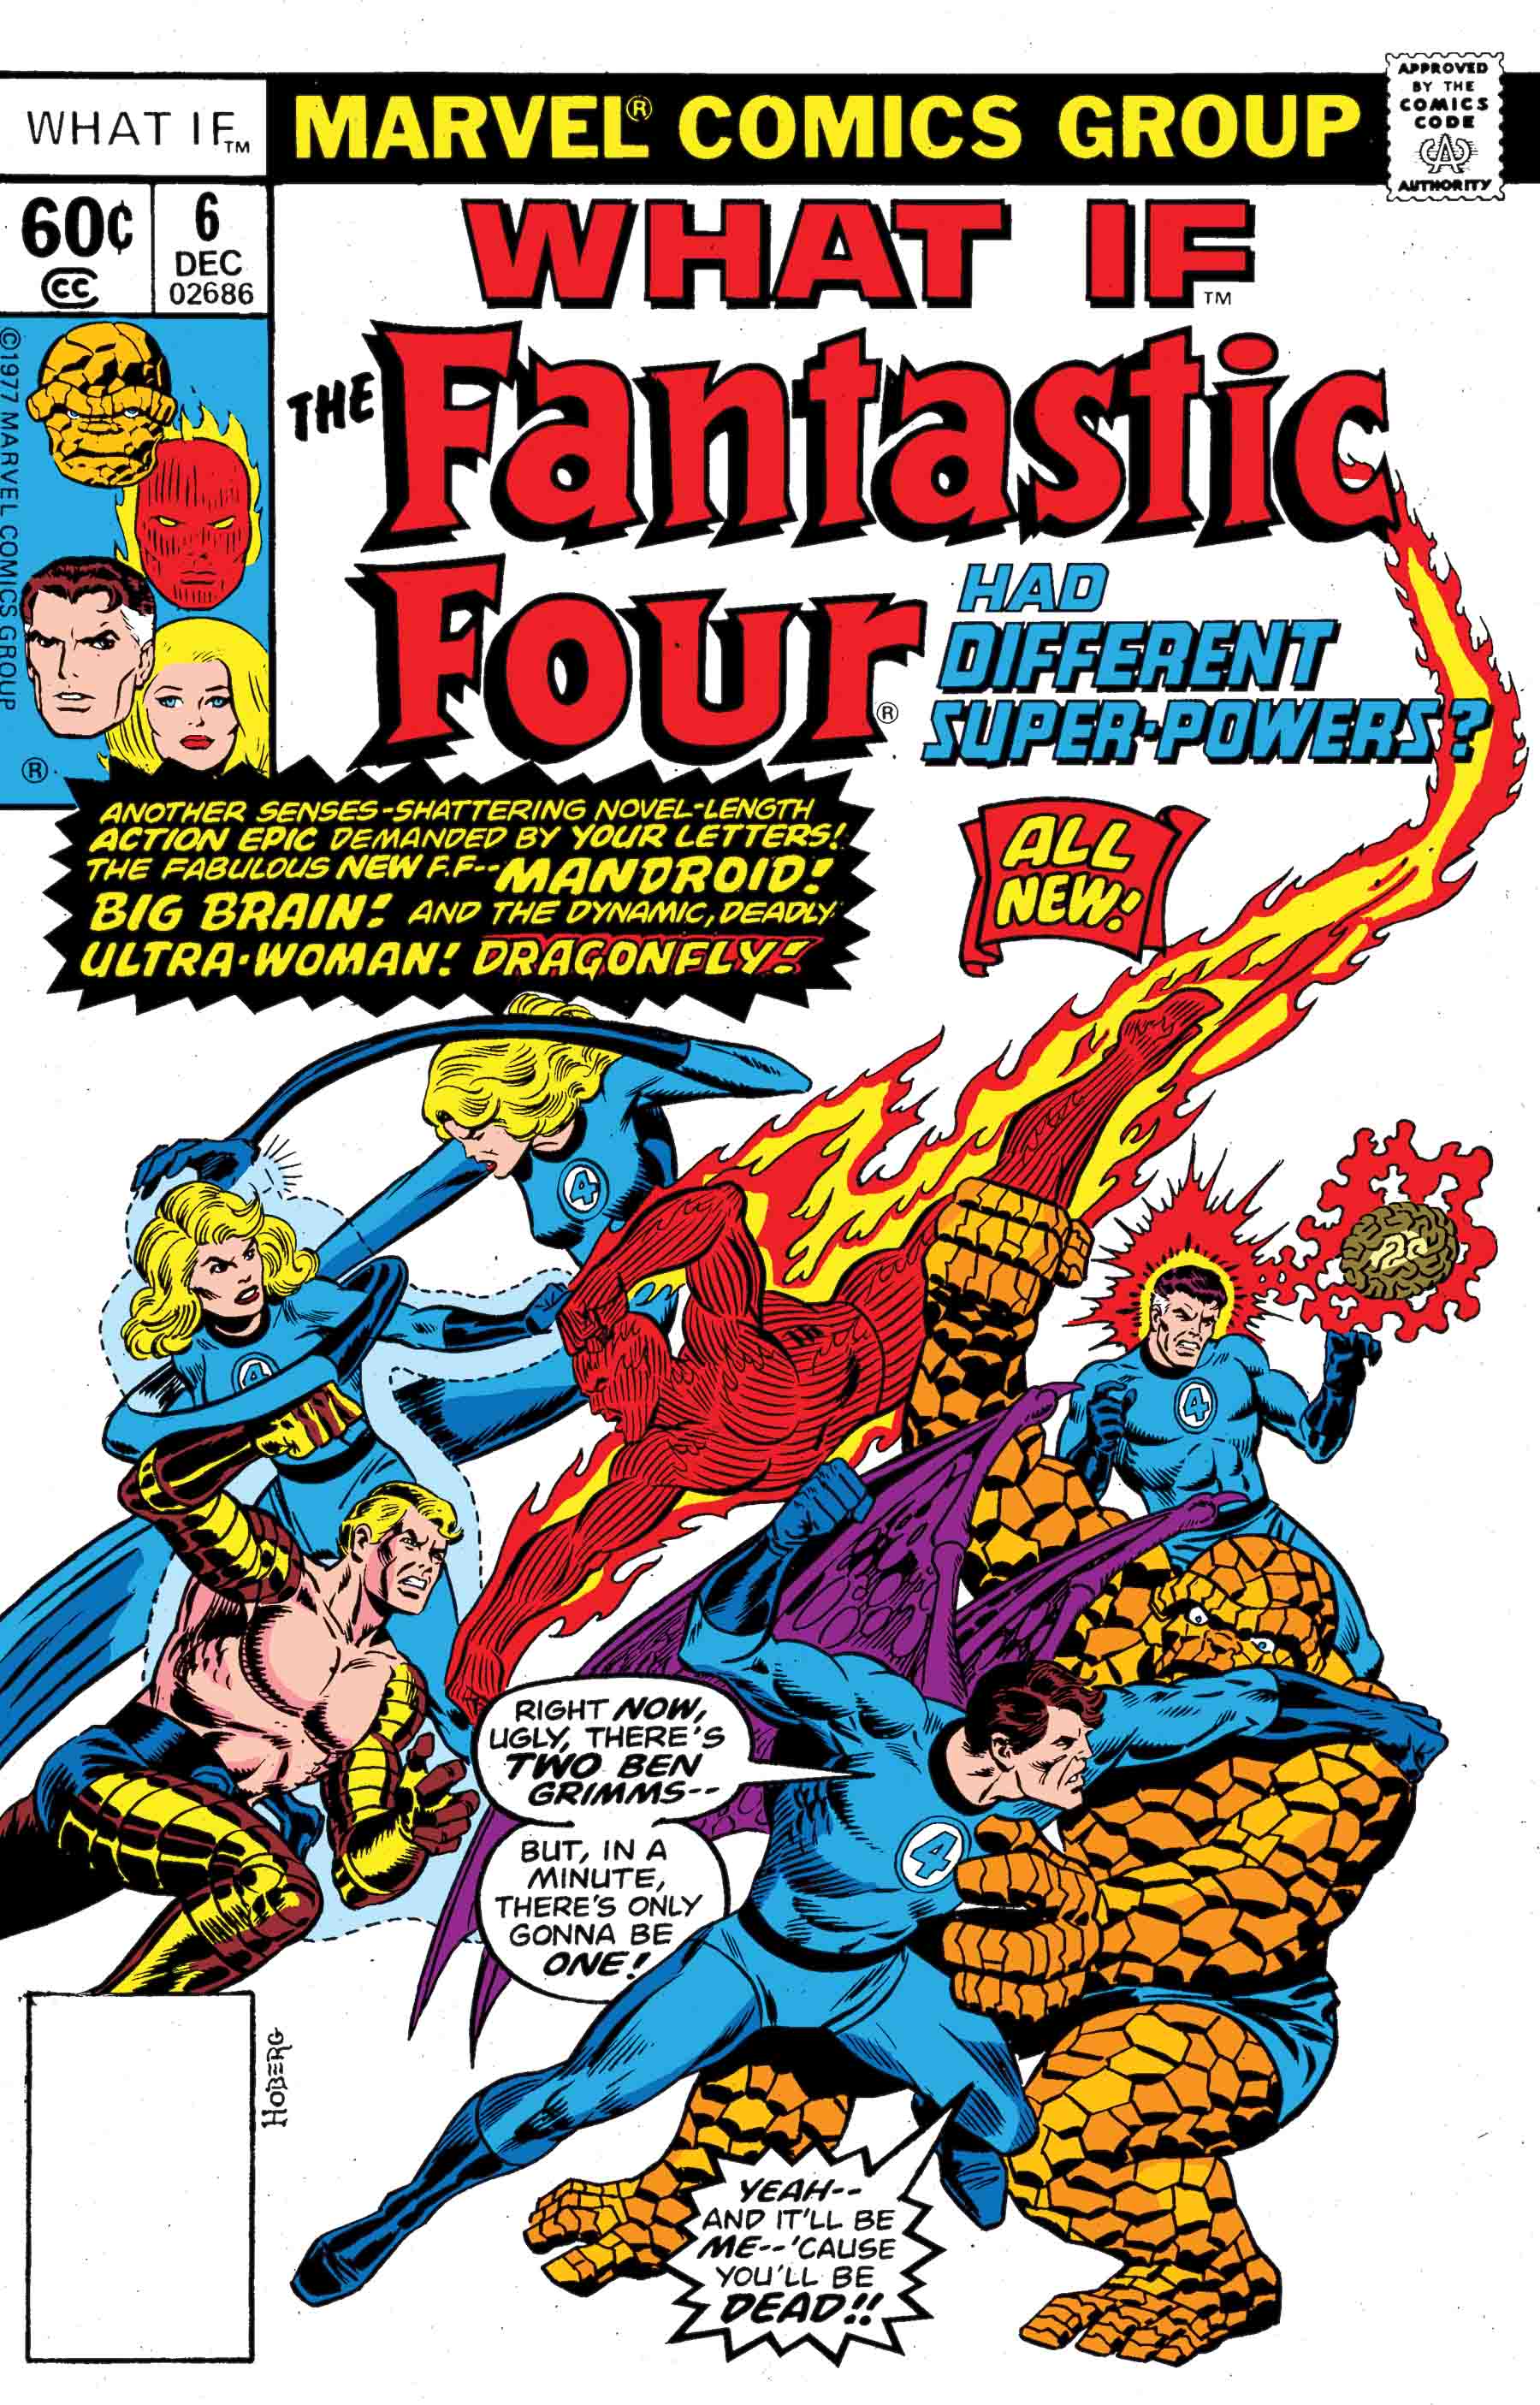 Marvel Comics News Digest Featuring Classic What If?